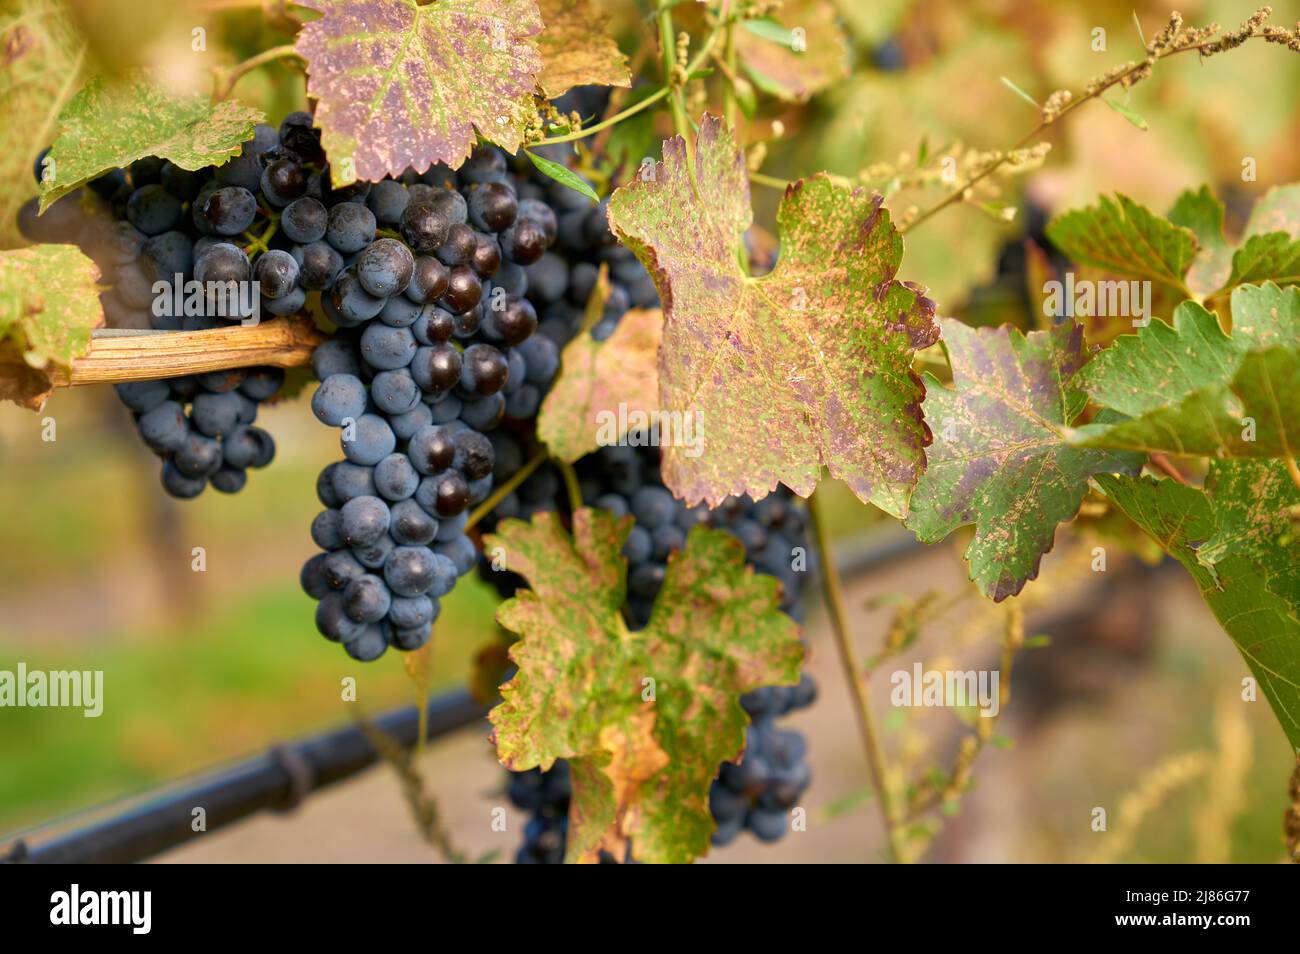 Red Wine Grapes on Vines. Ripe bunches of red grapes hang on the vine in a vineyard ready to be harvested. Okanagan Valley near Osoyoos, British Colum Stock Photo